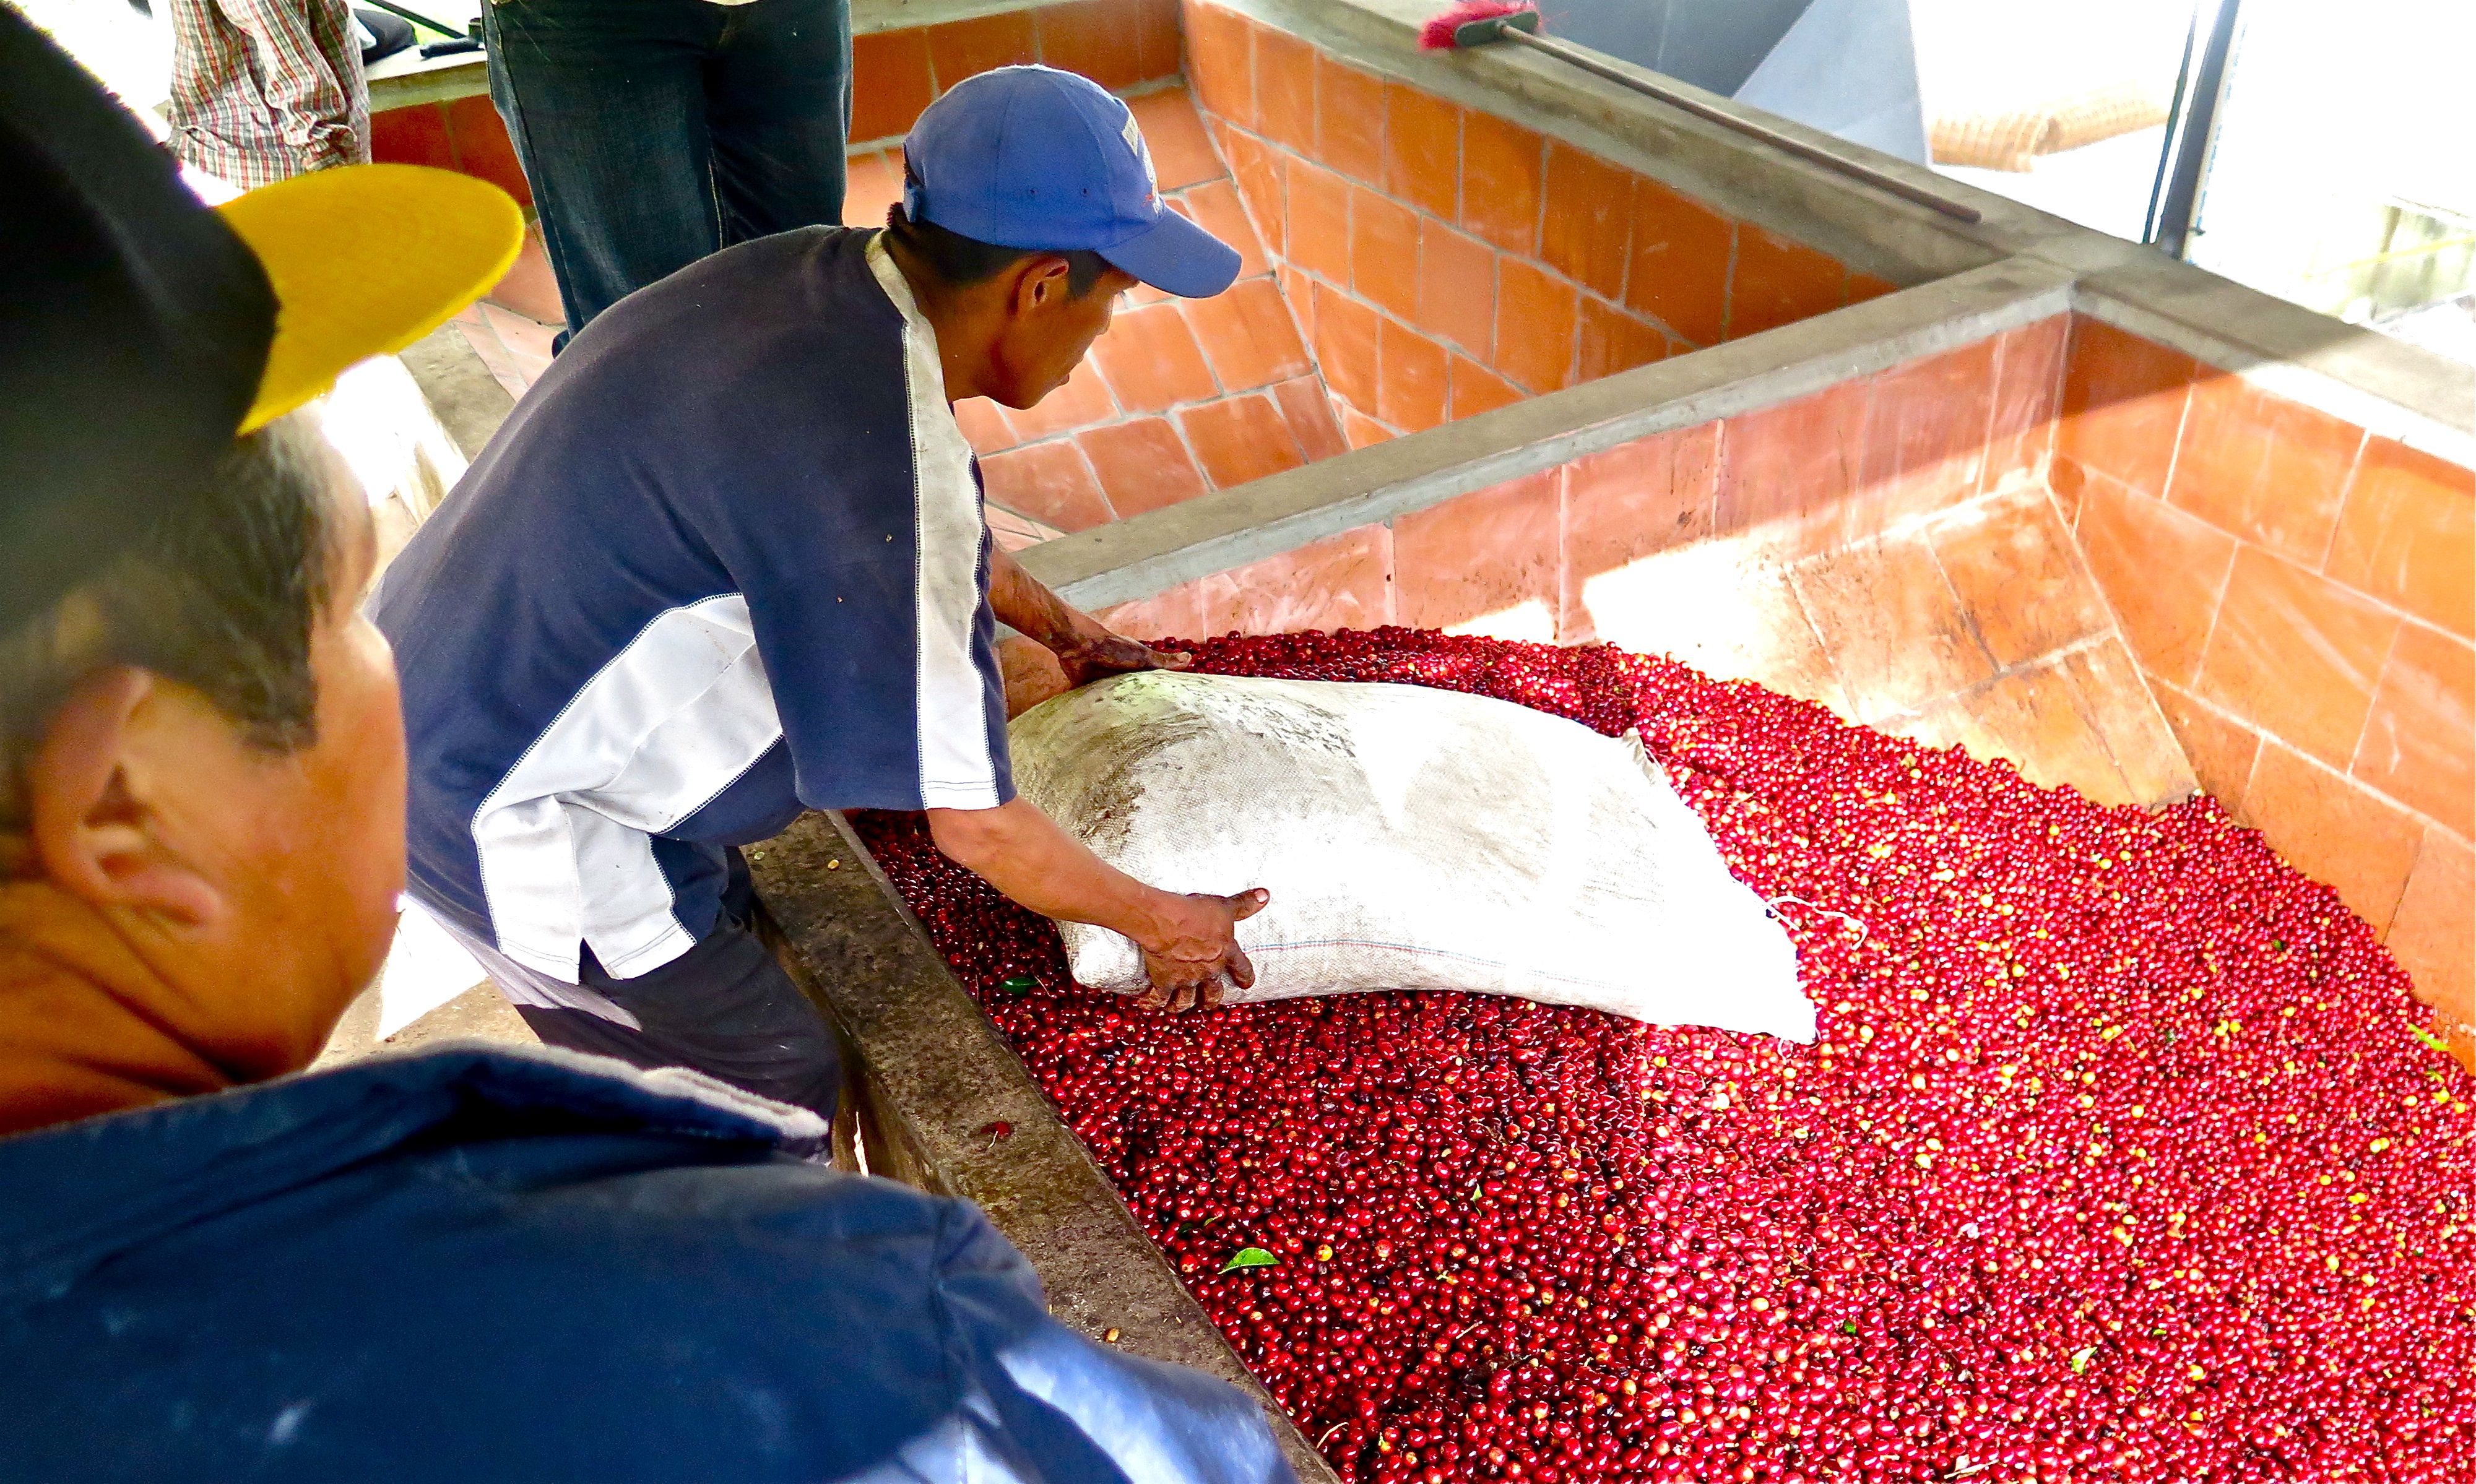 Harvested ripe coffee is loaded into a bin for crushing at the Finca Lerida farm. Photo/Keith Schneider